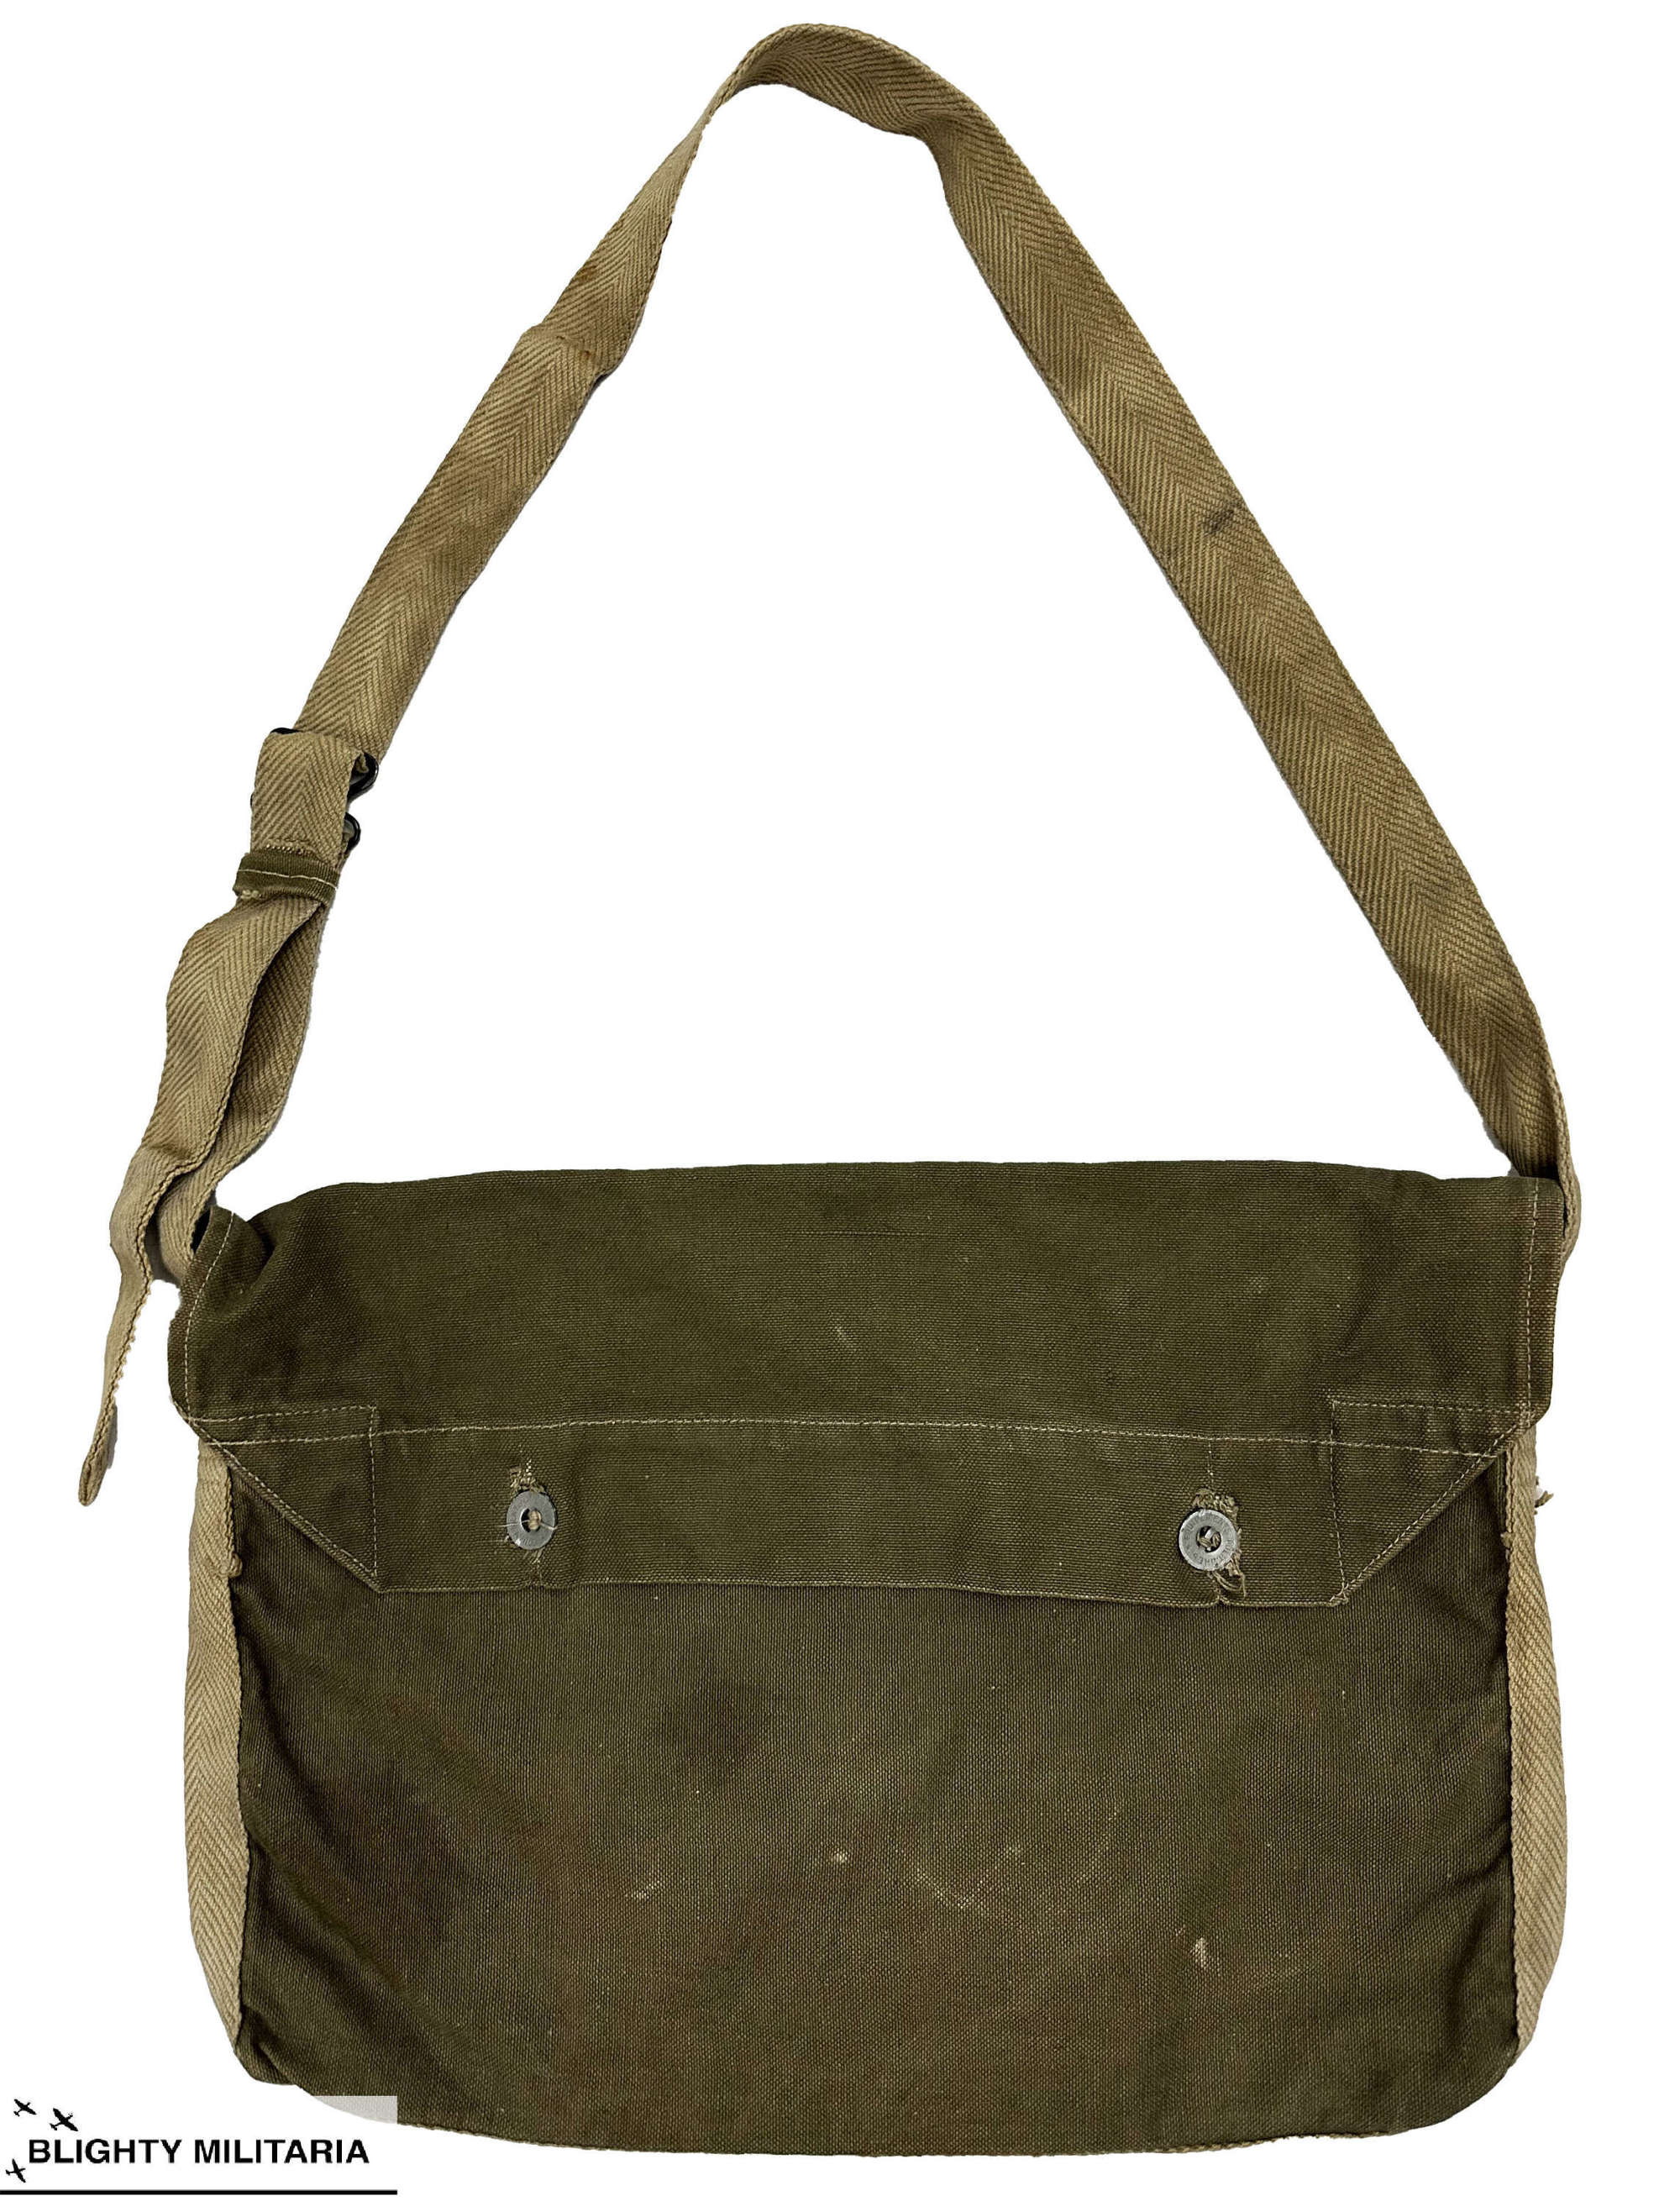 Original 1940s French Army Modele 1892 Musette Bag Haversack